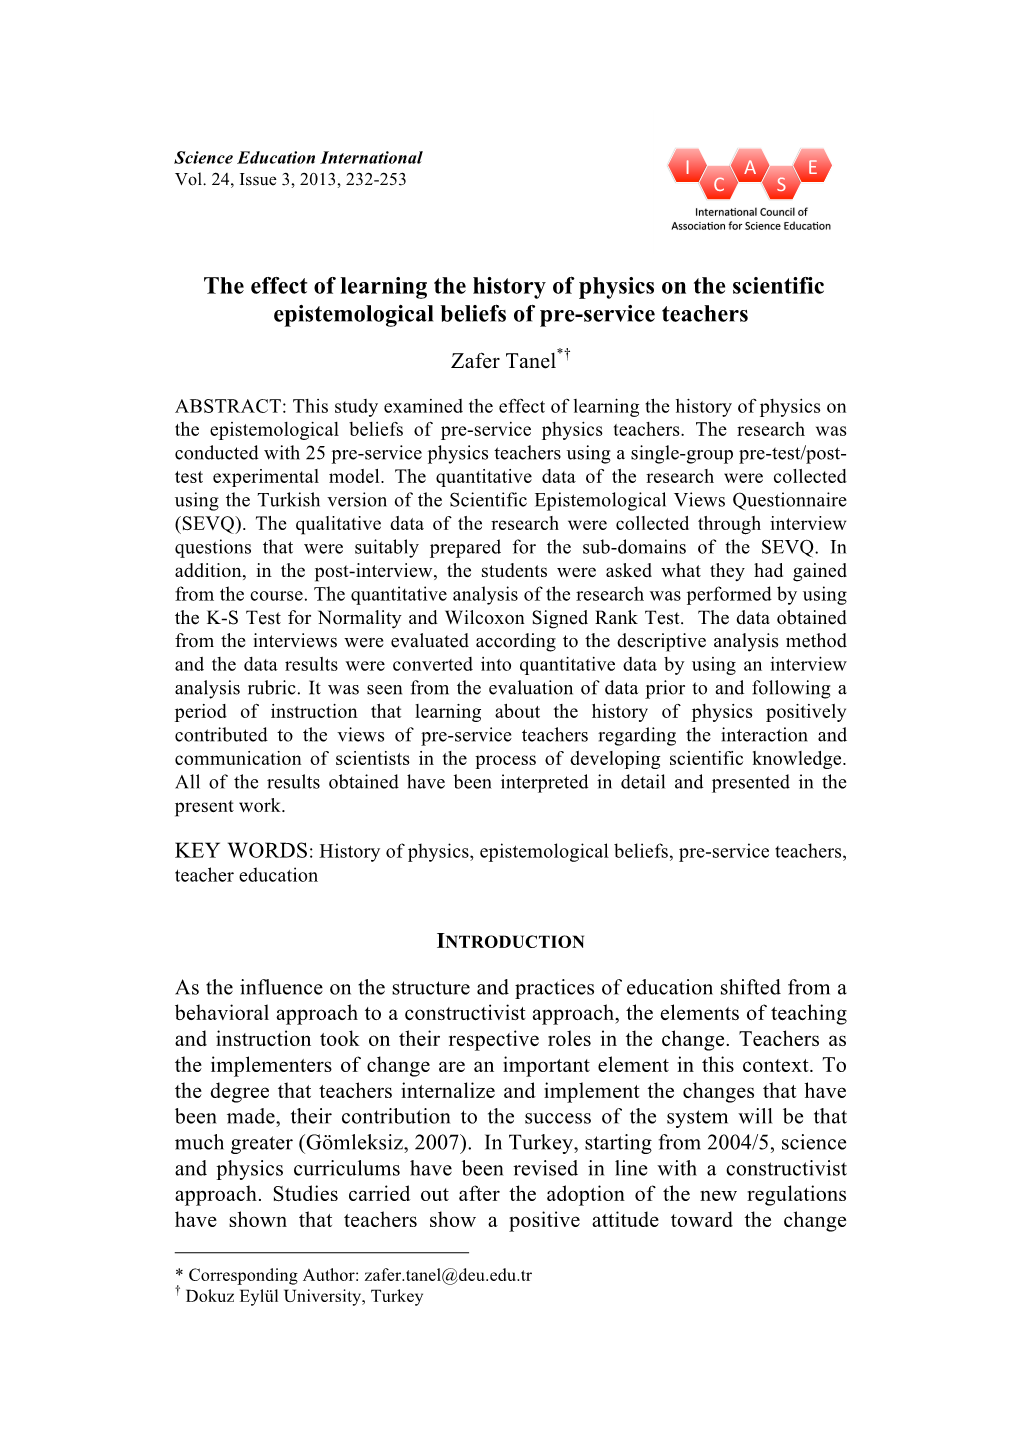 The Effect of Learning the History of Physics on the Scientific Epistemological Beliefs of Pre-Service Teachers